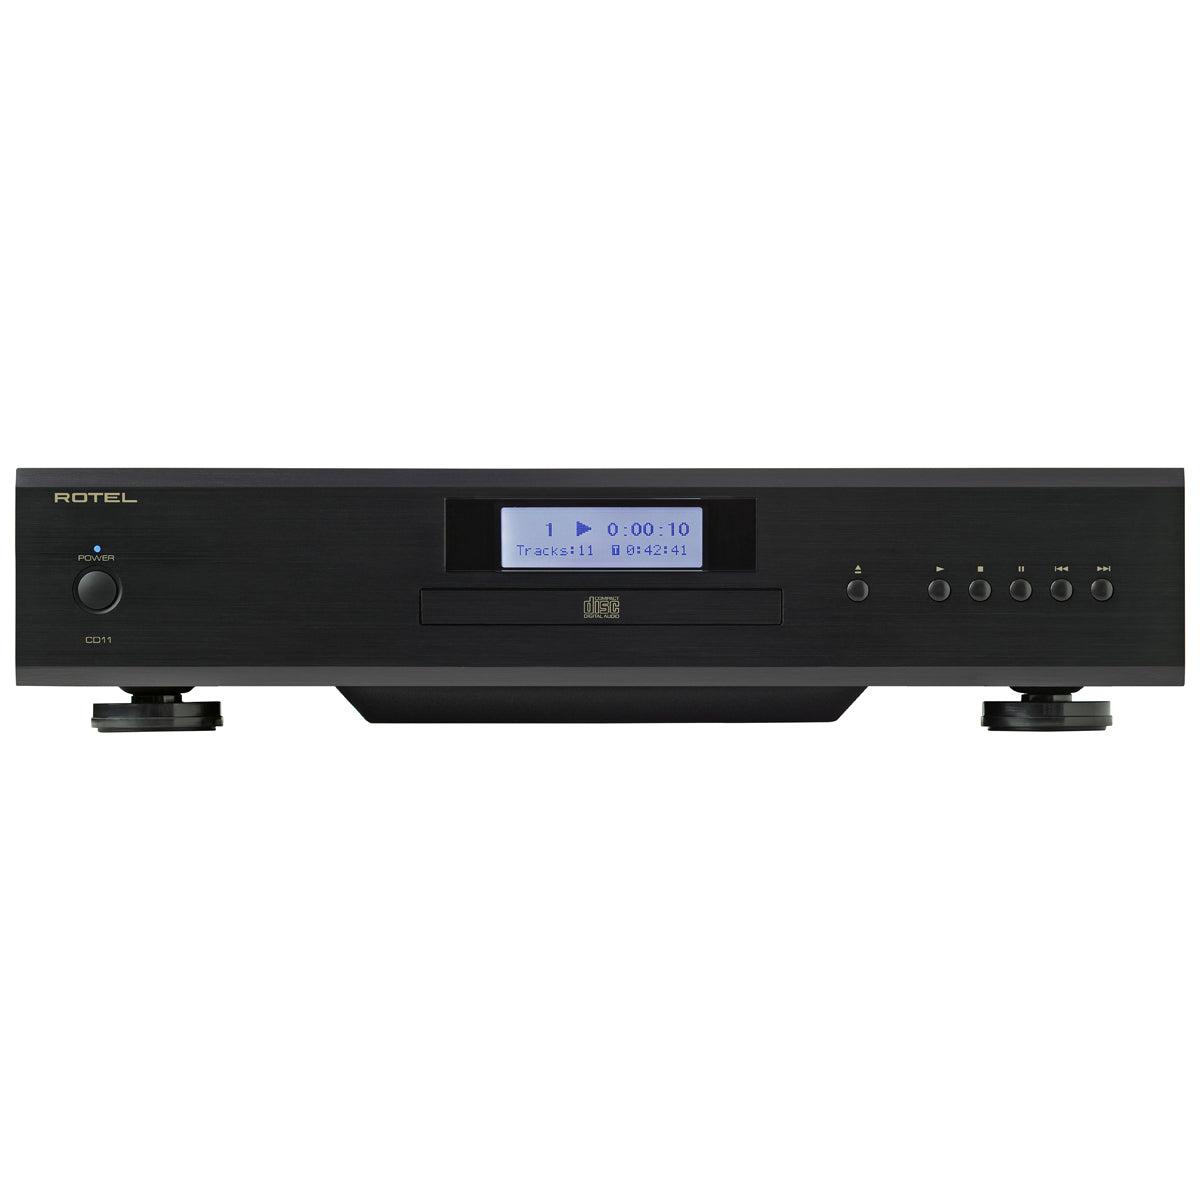 Rotel CD11 Tribute CD Player - Black - The Audio Experts